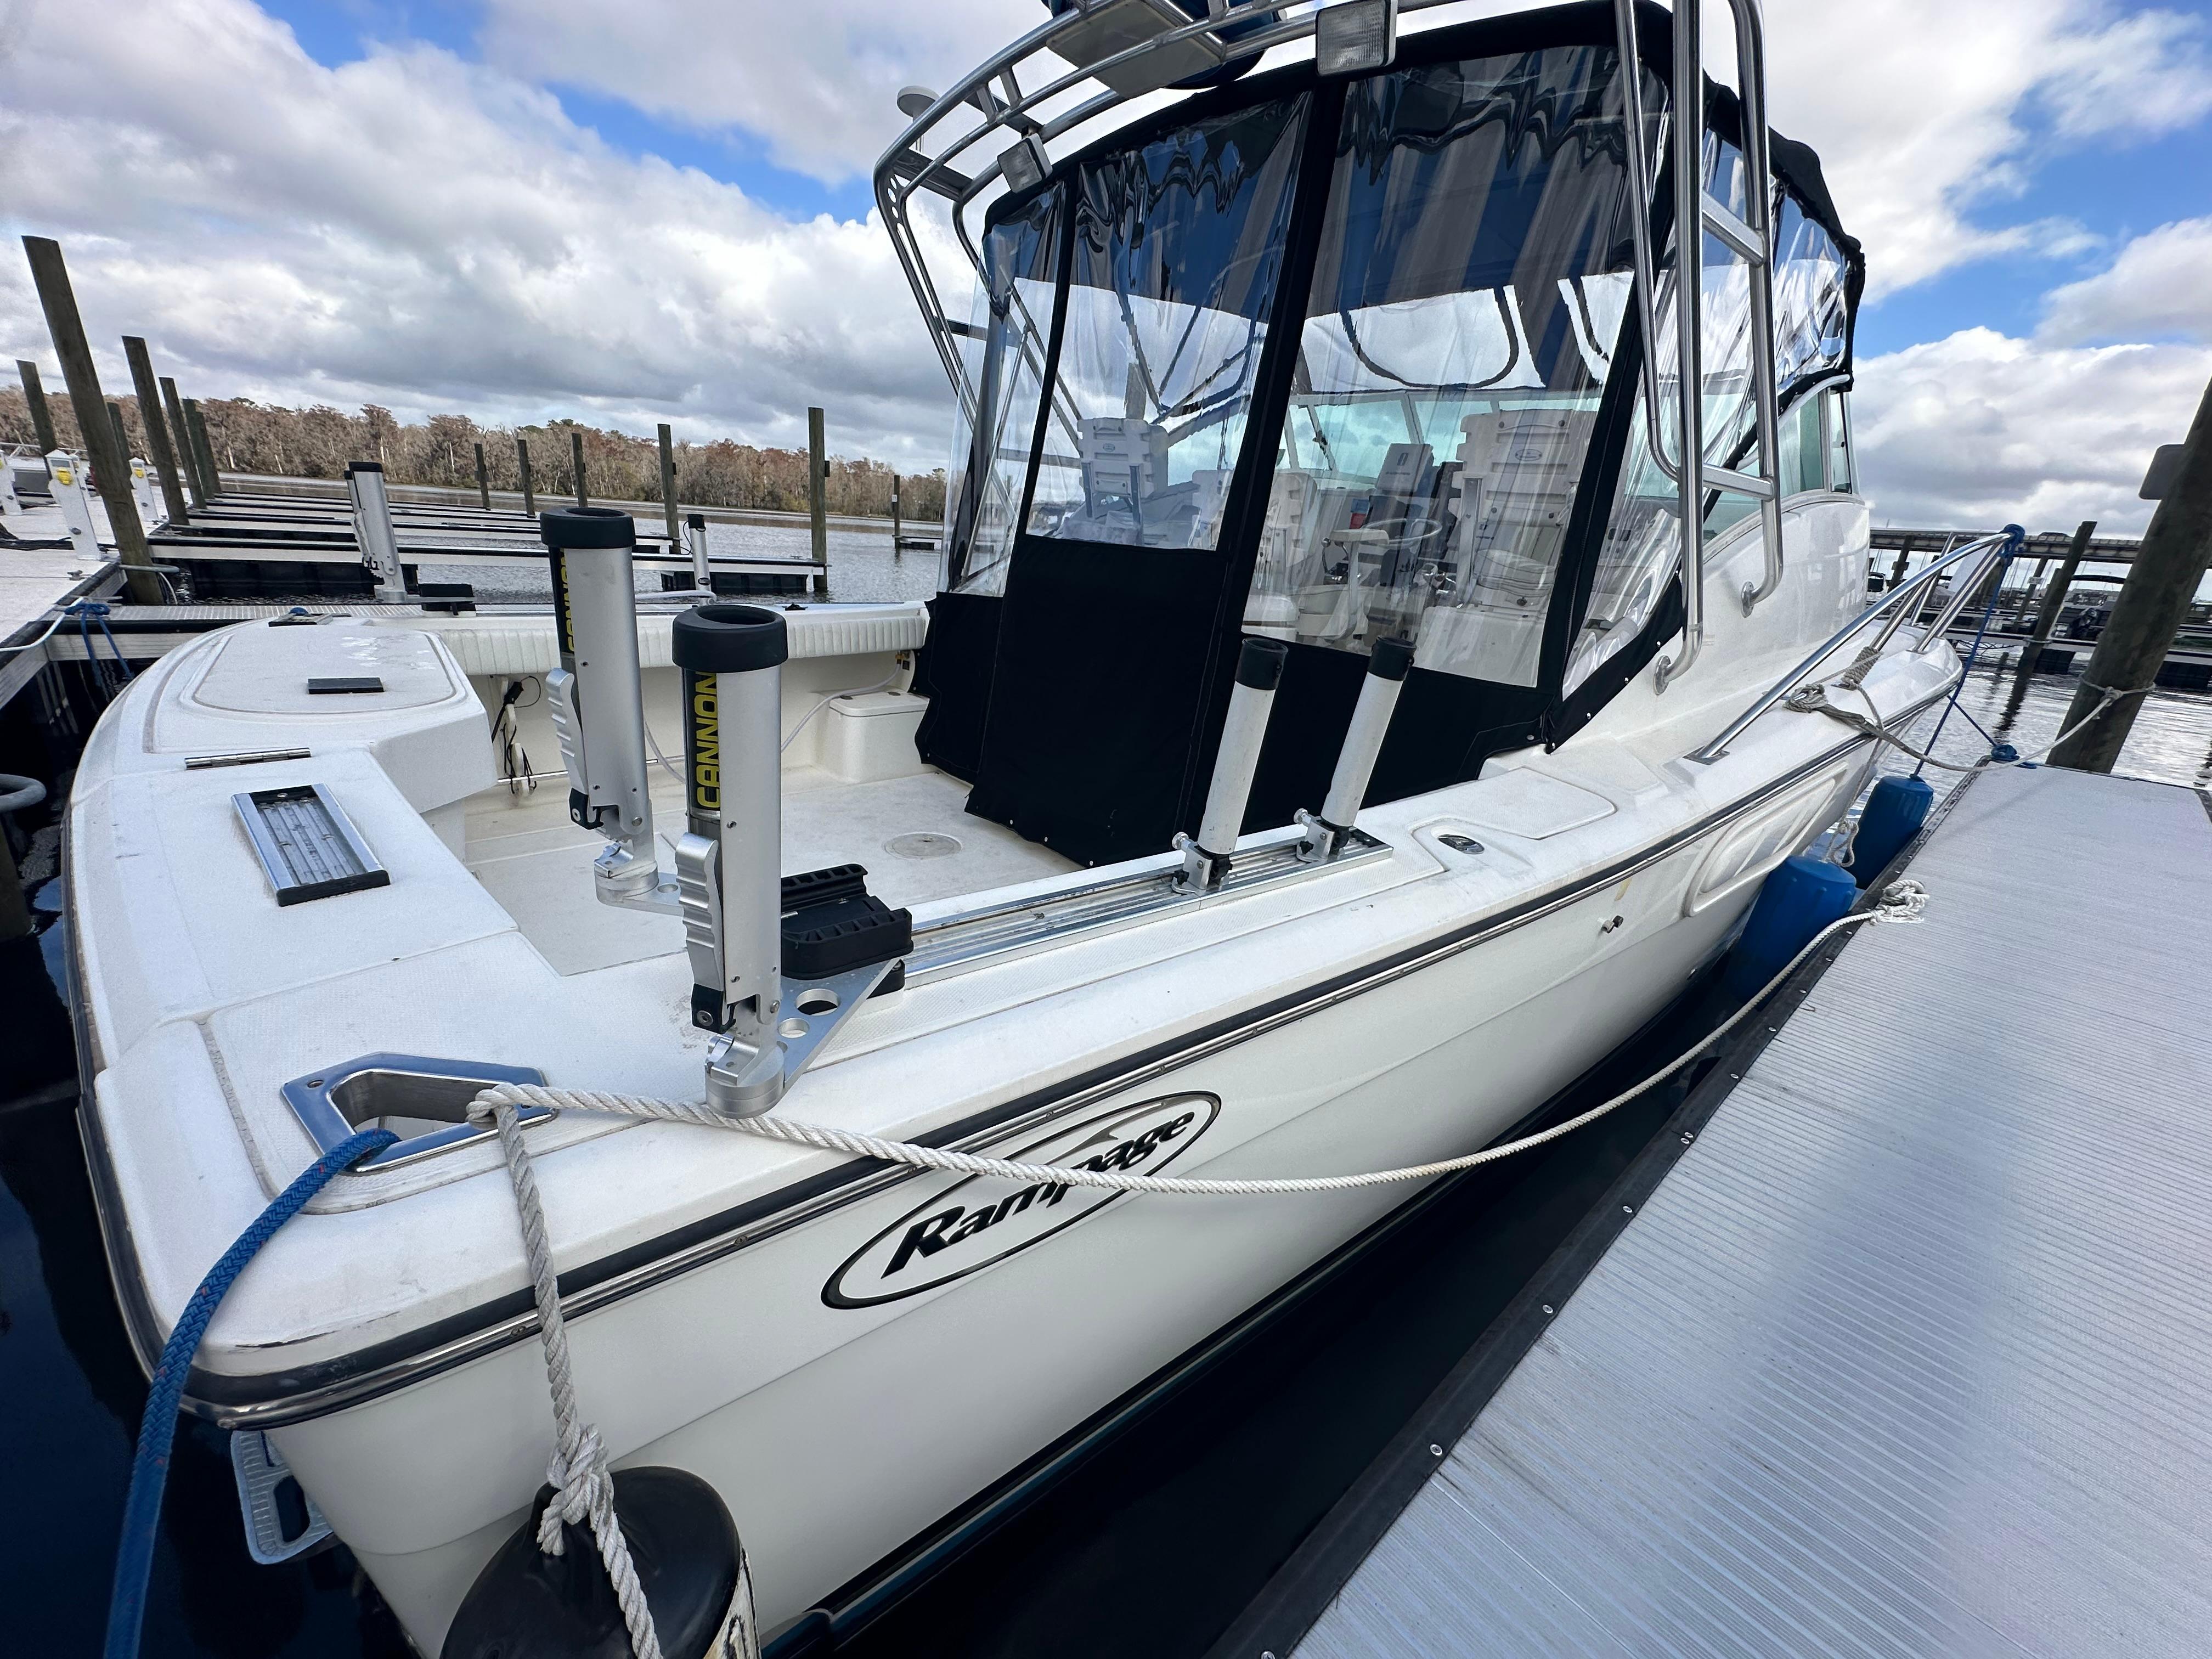 2003 Rampage 30 Offshore